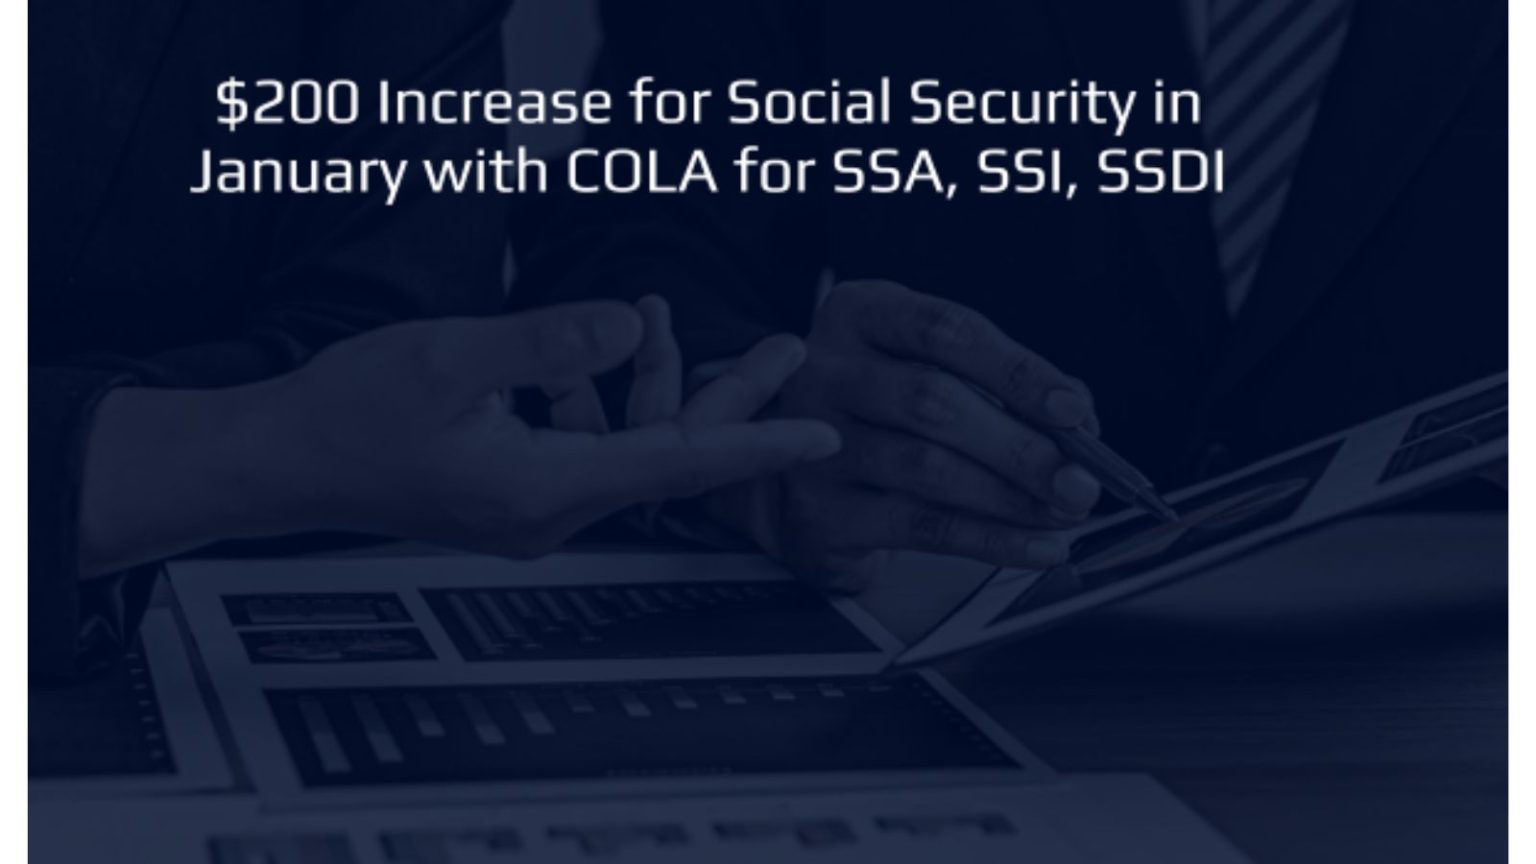 Who Qualifies for the 200 Social Security Increase? Understanding COLA